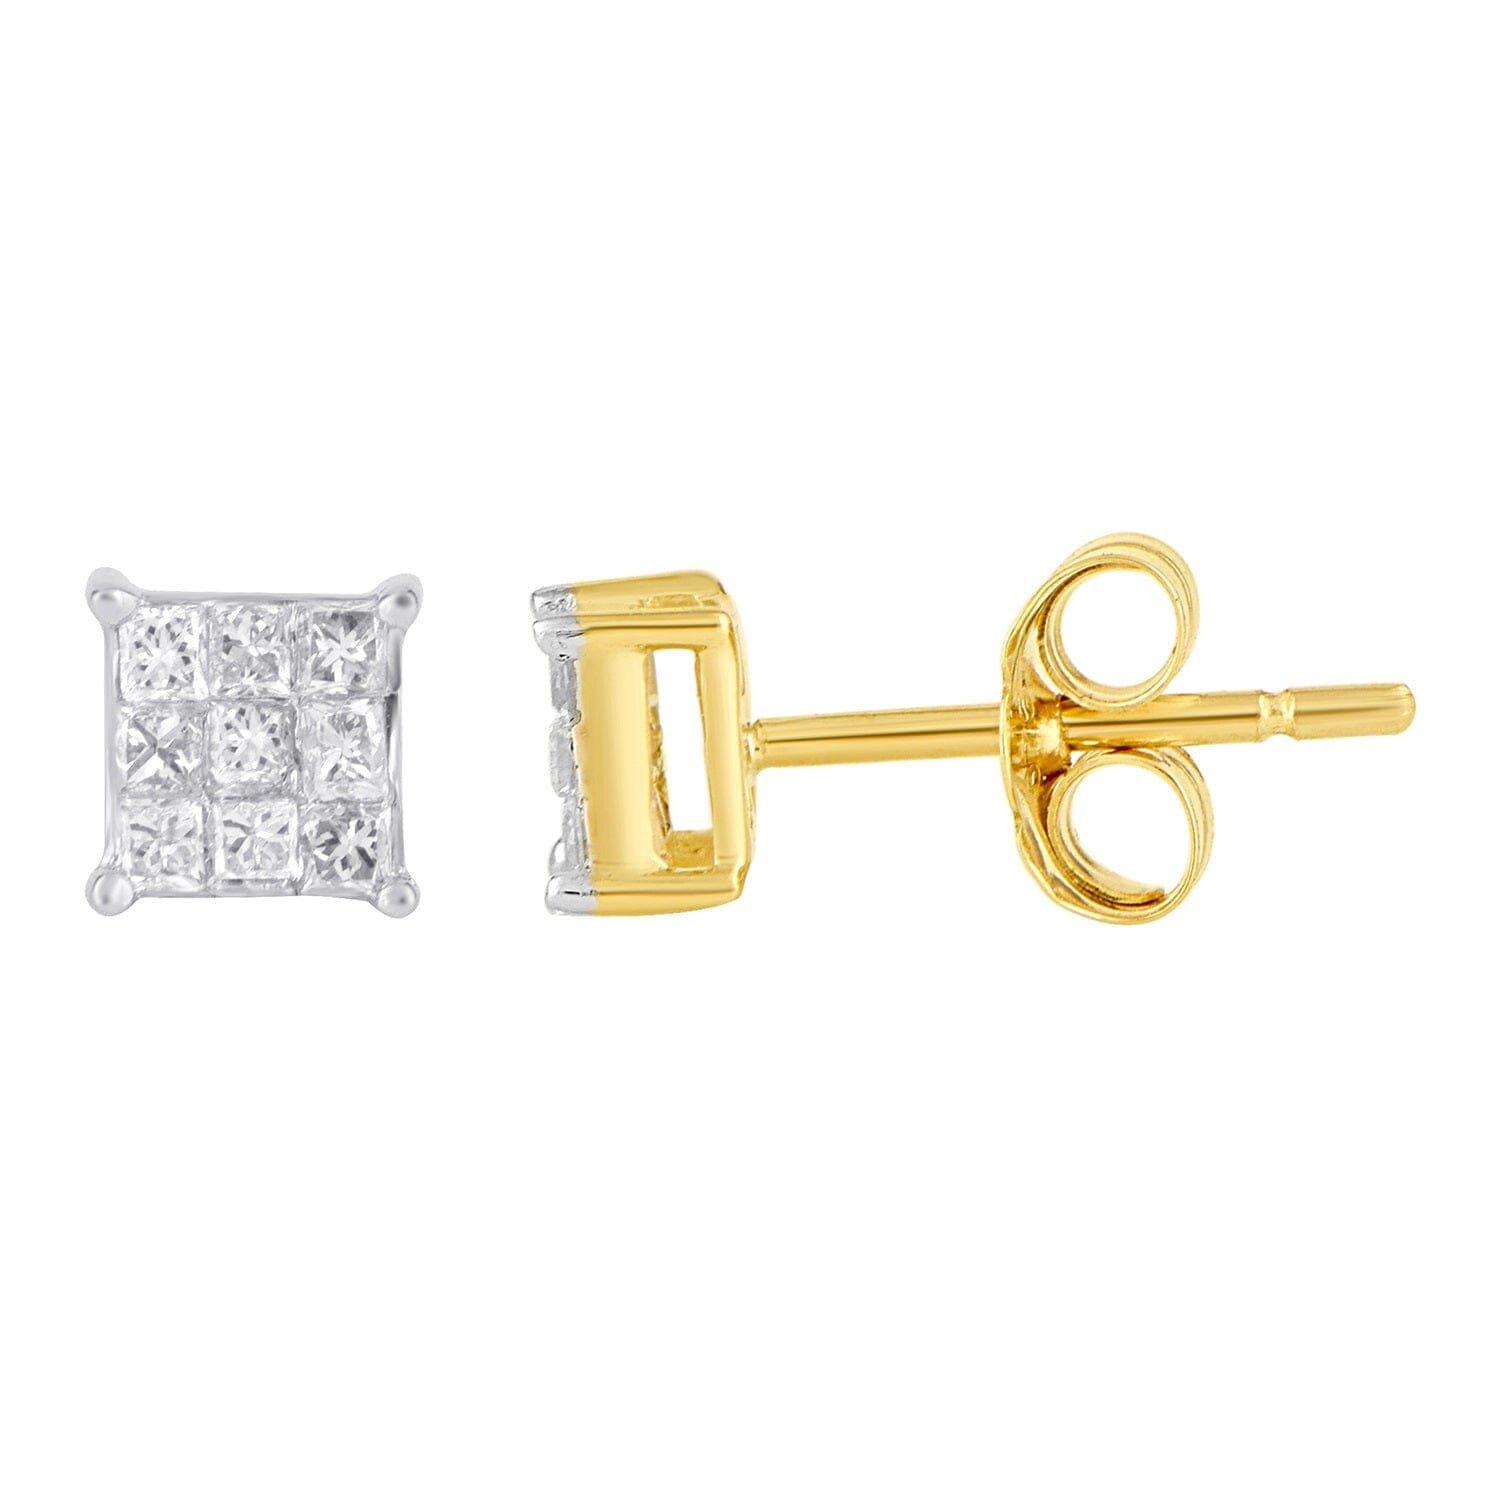 Invisible Princess Stud Earrings with 0.20ct of Diamonds in 9ct Yellow Gold Earrings Bevilles 